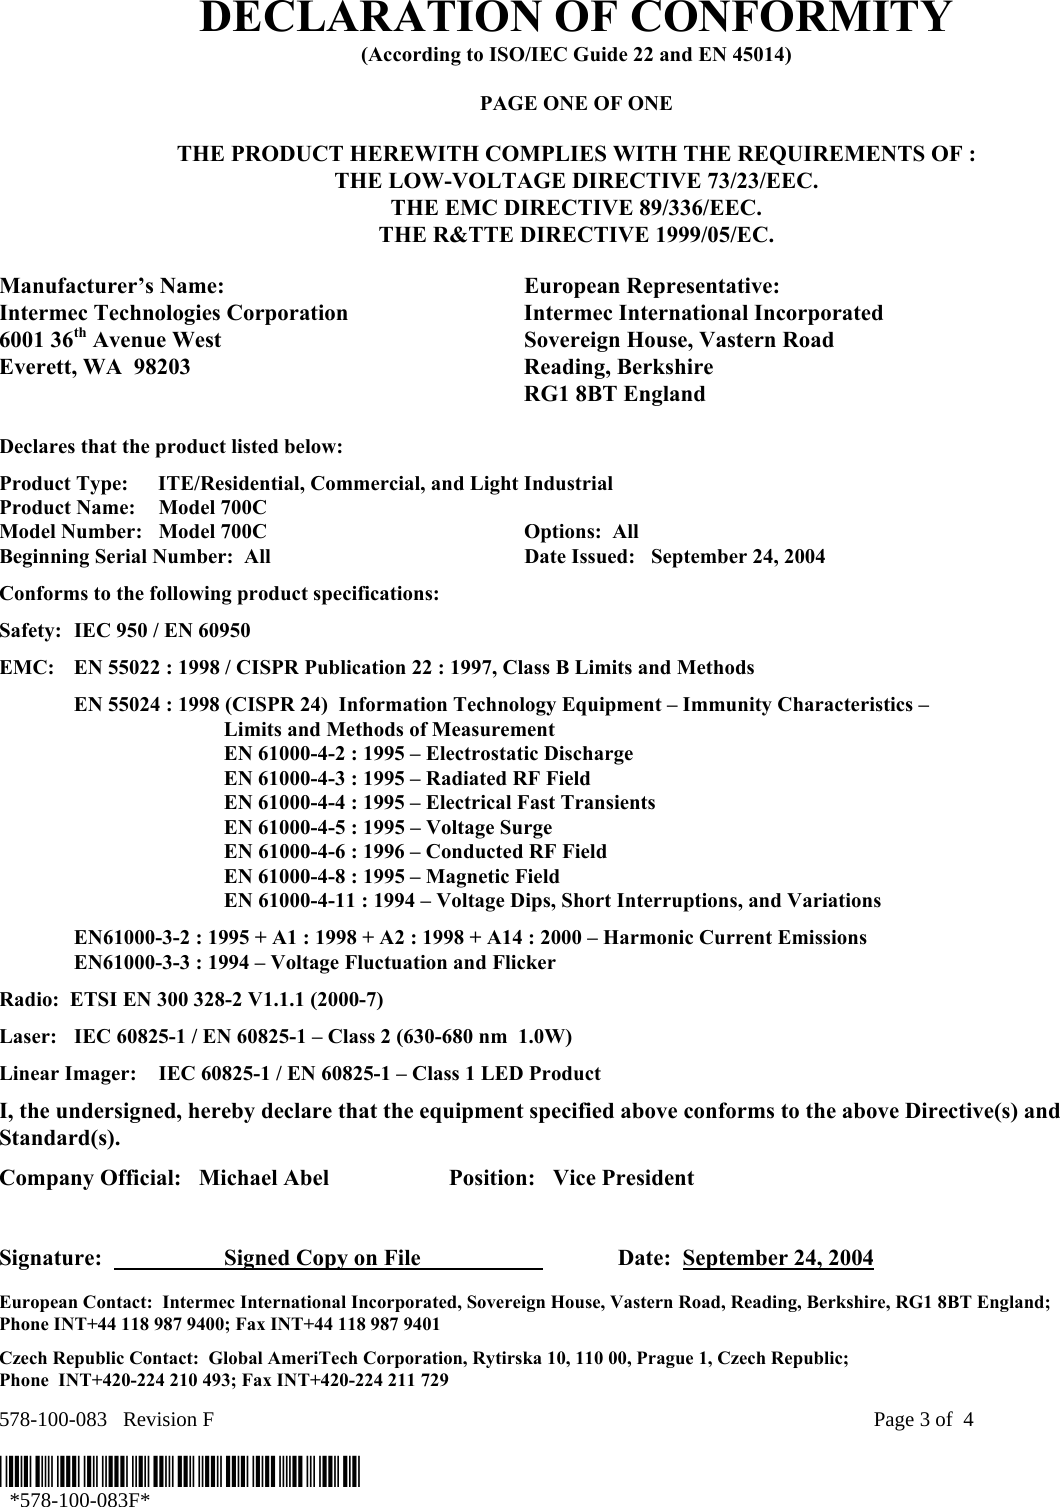 578-100-083   Revision F    Page 3 of  4  *578-100-083F*   *578-100-083F* DECLARATION OF CONFORMITY (According to ISO/IEC Guide 22 and EN 45014)  PAGE ONE OF ONE  THE PRODUCT HEREWITH COMPLIES WITH THE REQUIREMENTS OF : THE LOW-VOLTAGE DIRECTIVE 73/23/EEC. THE EMC DIRECTIVE 89/336/EEC. THE R&amp;TTE DIRECTIVE 1999/05/EC.  Manufacturer’s Name:  European Representative: Intermec Technologies Corporation  Intermec International Incorporated 6001 36th Avenue West  Sovereign House, Vastern Road Everett, WA  98203  Reading, Berkshire   RG1 8BT England  Declares that the product listed below: Product Type:  ITE/Residential, Commercial, and Light Industrial Product Name:    Model 700C Model Number:  Model 700C  Options:  All   Beginning Serial Number:  All  Date Issued:   September 24, 2004 Conforms to the following product specifications: Safety:  IEC 950 / EN 60950 EMC:  EN 55022 : 1998 / CISPR Publication 22 : 1997, Class B Limits and Methods   EN 55024 : 1998 (CISPR 24)  Information Technology Equipment – Immunity Characteristics –        Limits and Methods of Measurement     EN 61000-4-2 : 1995 – Electrostatic Discharge     EN 61000-4-3 : 1995 – Radiated RF Field     EN 61000-4-4 : 1995 – Electrical Fast Transients     EN 61000-4-5 : 1995 – Voltage Surge     EN 61000-4-6 : 1996 – Conducted RF Field     EN 61000-4-8 : 1995 – Magnetic Field     EN 61000-4-11 : 1994 – Voltage Dips, Short Interruptions, and Variations   EN61000-3-2 : 1995 + A1 : 1998 + A2 : 1998 + A14 : 2000 – Harmonic Current Emissions   EN61000-3-3 : 1994 – Voltage Fluctuation and Flicker Radio:  ETSI EN 300 328-2 V1.1.1 (2000-7) Laser:  IEC 60825-1 / EN 60825-1 – Class 2 (630-680 nm  1.0W) Linear Imager:  IEC 60825-1 / EN 60825-1 – Class 1 LED Product I, the undersigned, hereby declare that the equipment specified above conforms to the above Directive(s) and Standard(s). Company Official:   Michael Abel  Position:   Vice President   Signature:    Signed Copy on File      Date:  September 24, 2004  European Contact:  Intermec International Incorporated, Sovereign House, Vastern Road, Reading, Berkshire, RG1 8BT England;  Phone INT+44 118 987 9400; Fax INT+44 118 987 9401 Czech Republic Contact:  Global AmeriTech Corporation, Rytirska 10, 110 00, Prague 1, Czech Republic;  Phone  INT+420-224 210 493; Fax INT+420-224 211 729 